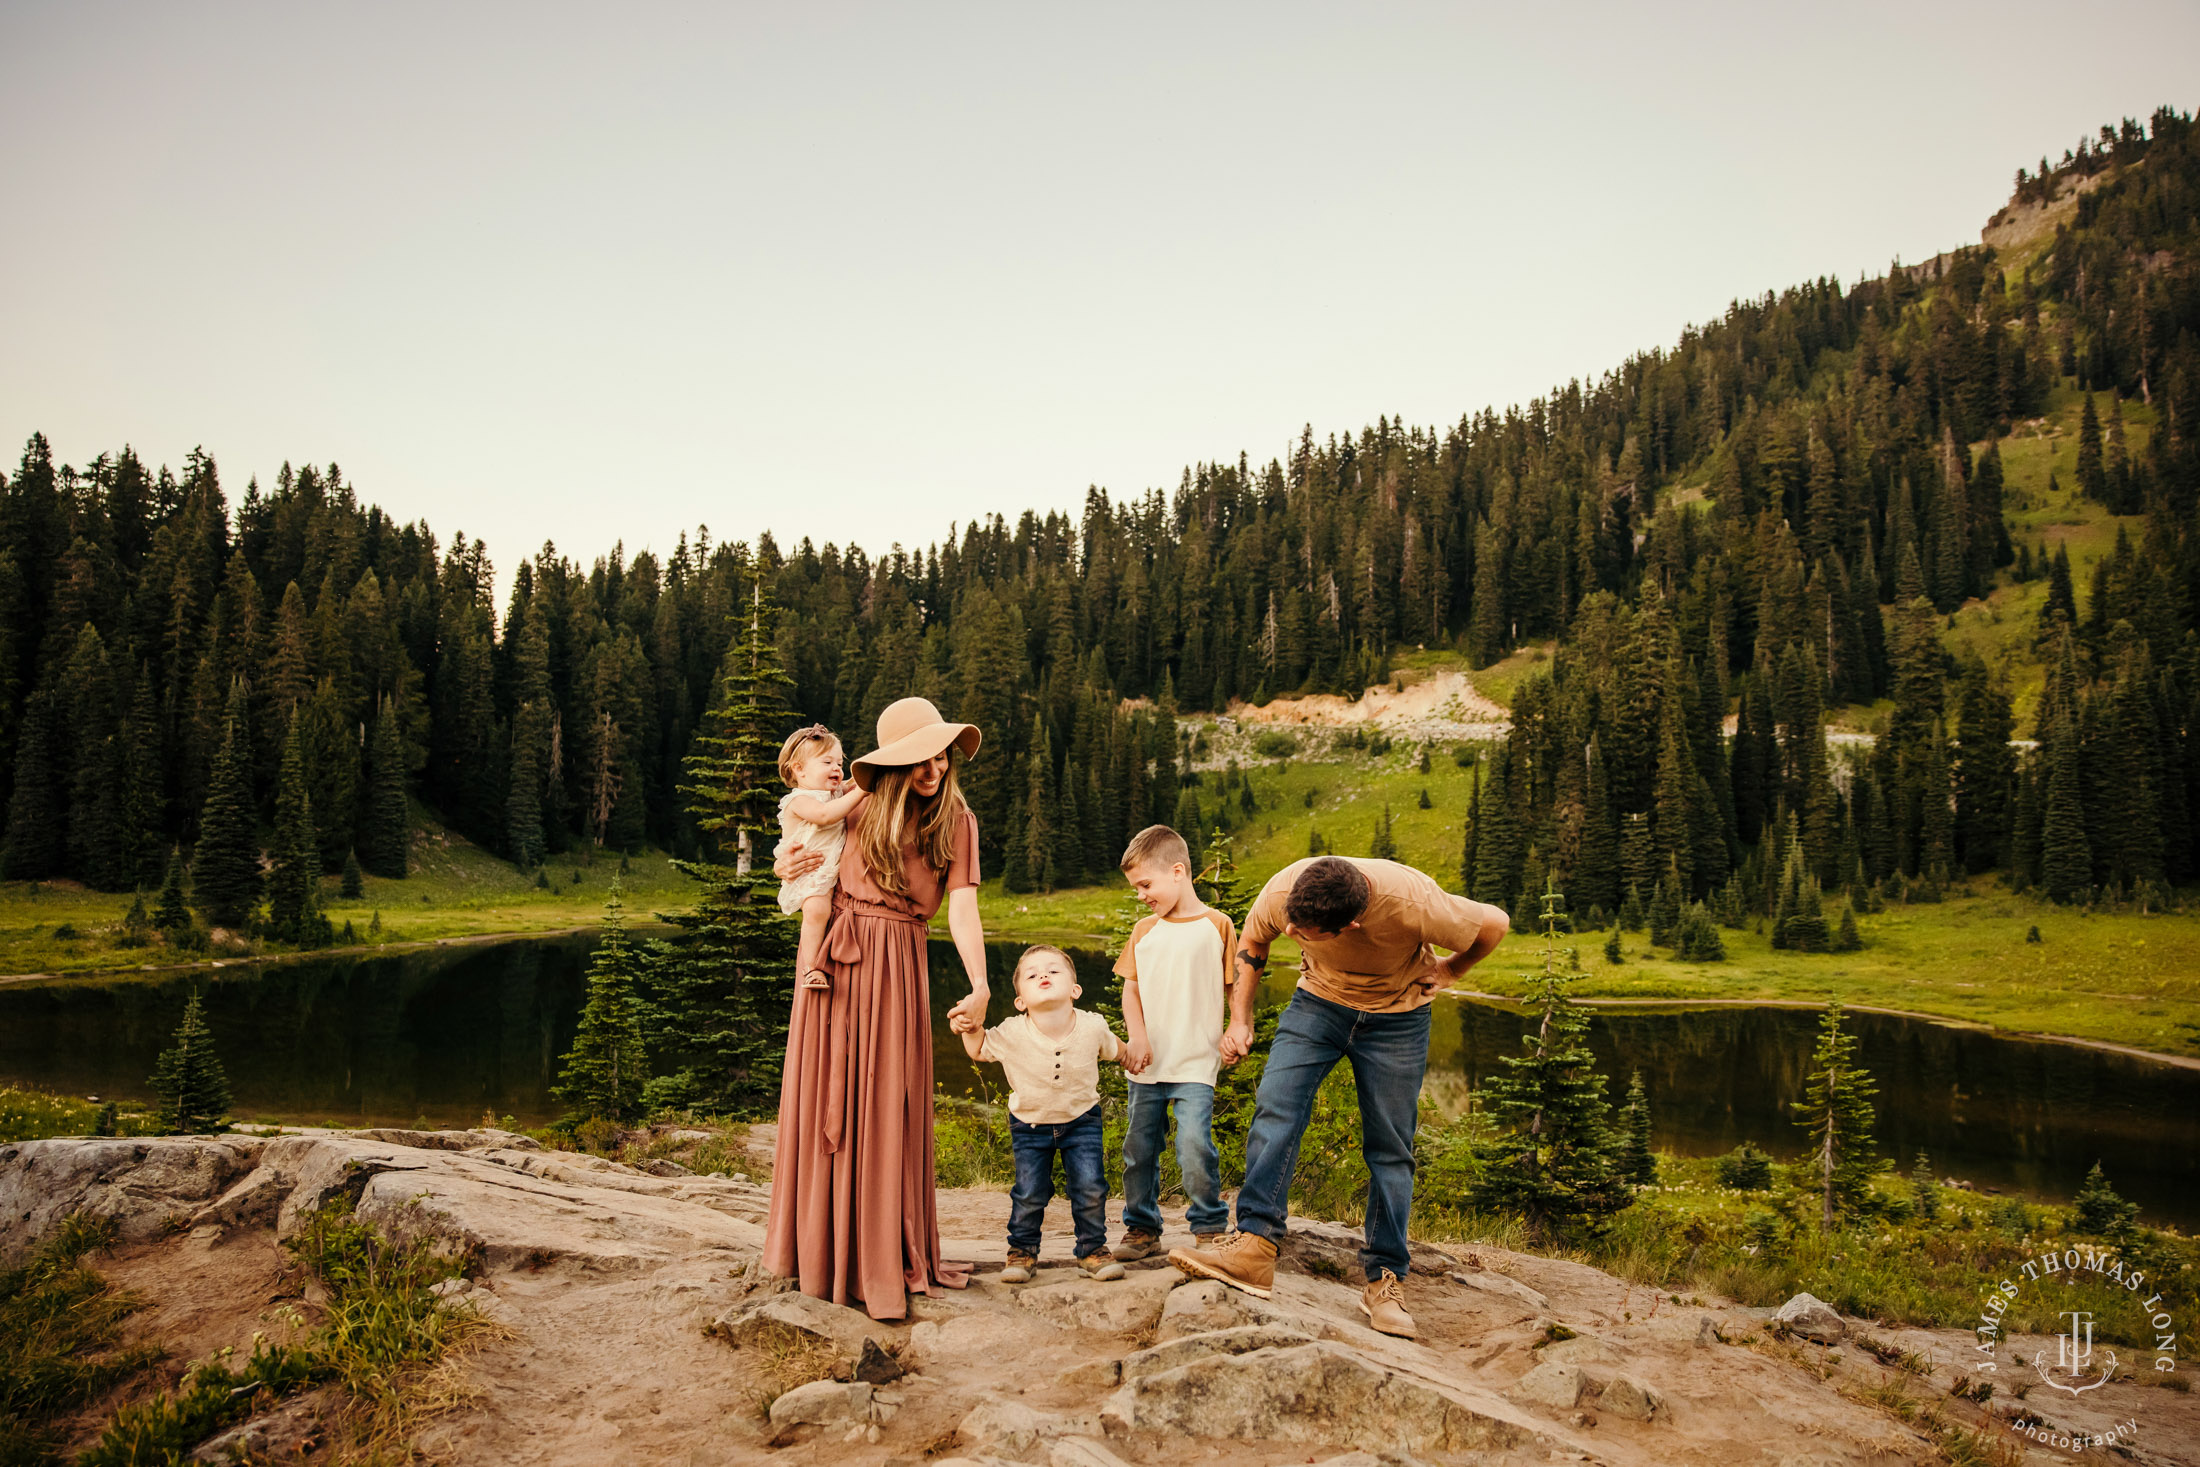 Family photography session at Mount Rainier by Snoqualmie family photographer James Thomas Long Photography